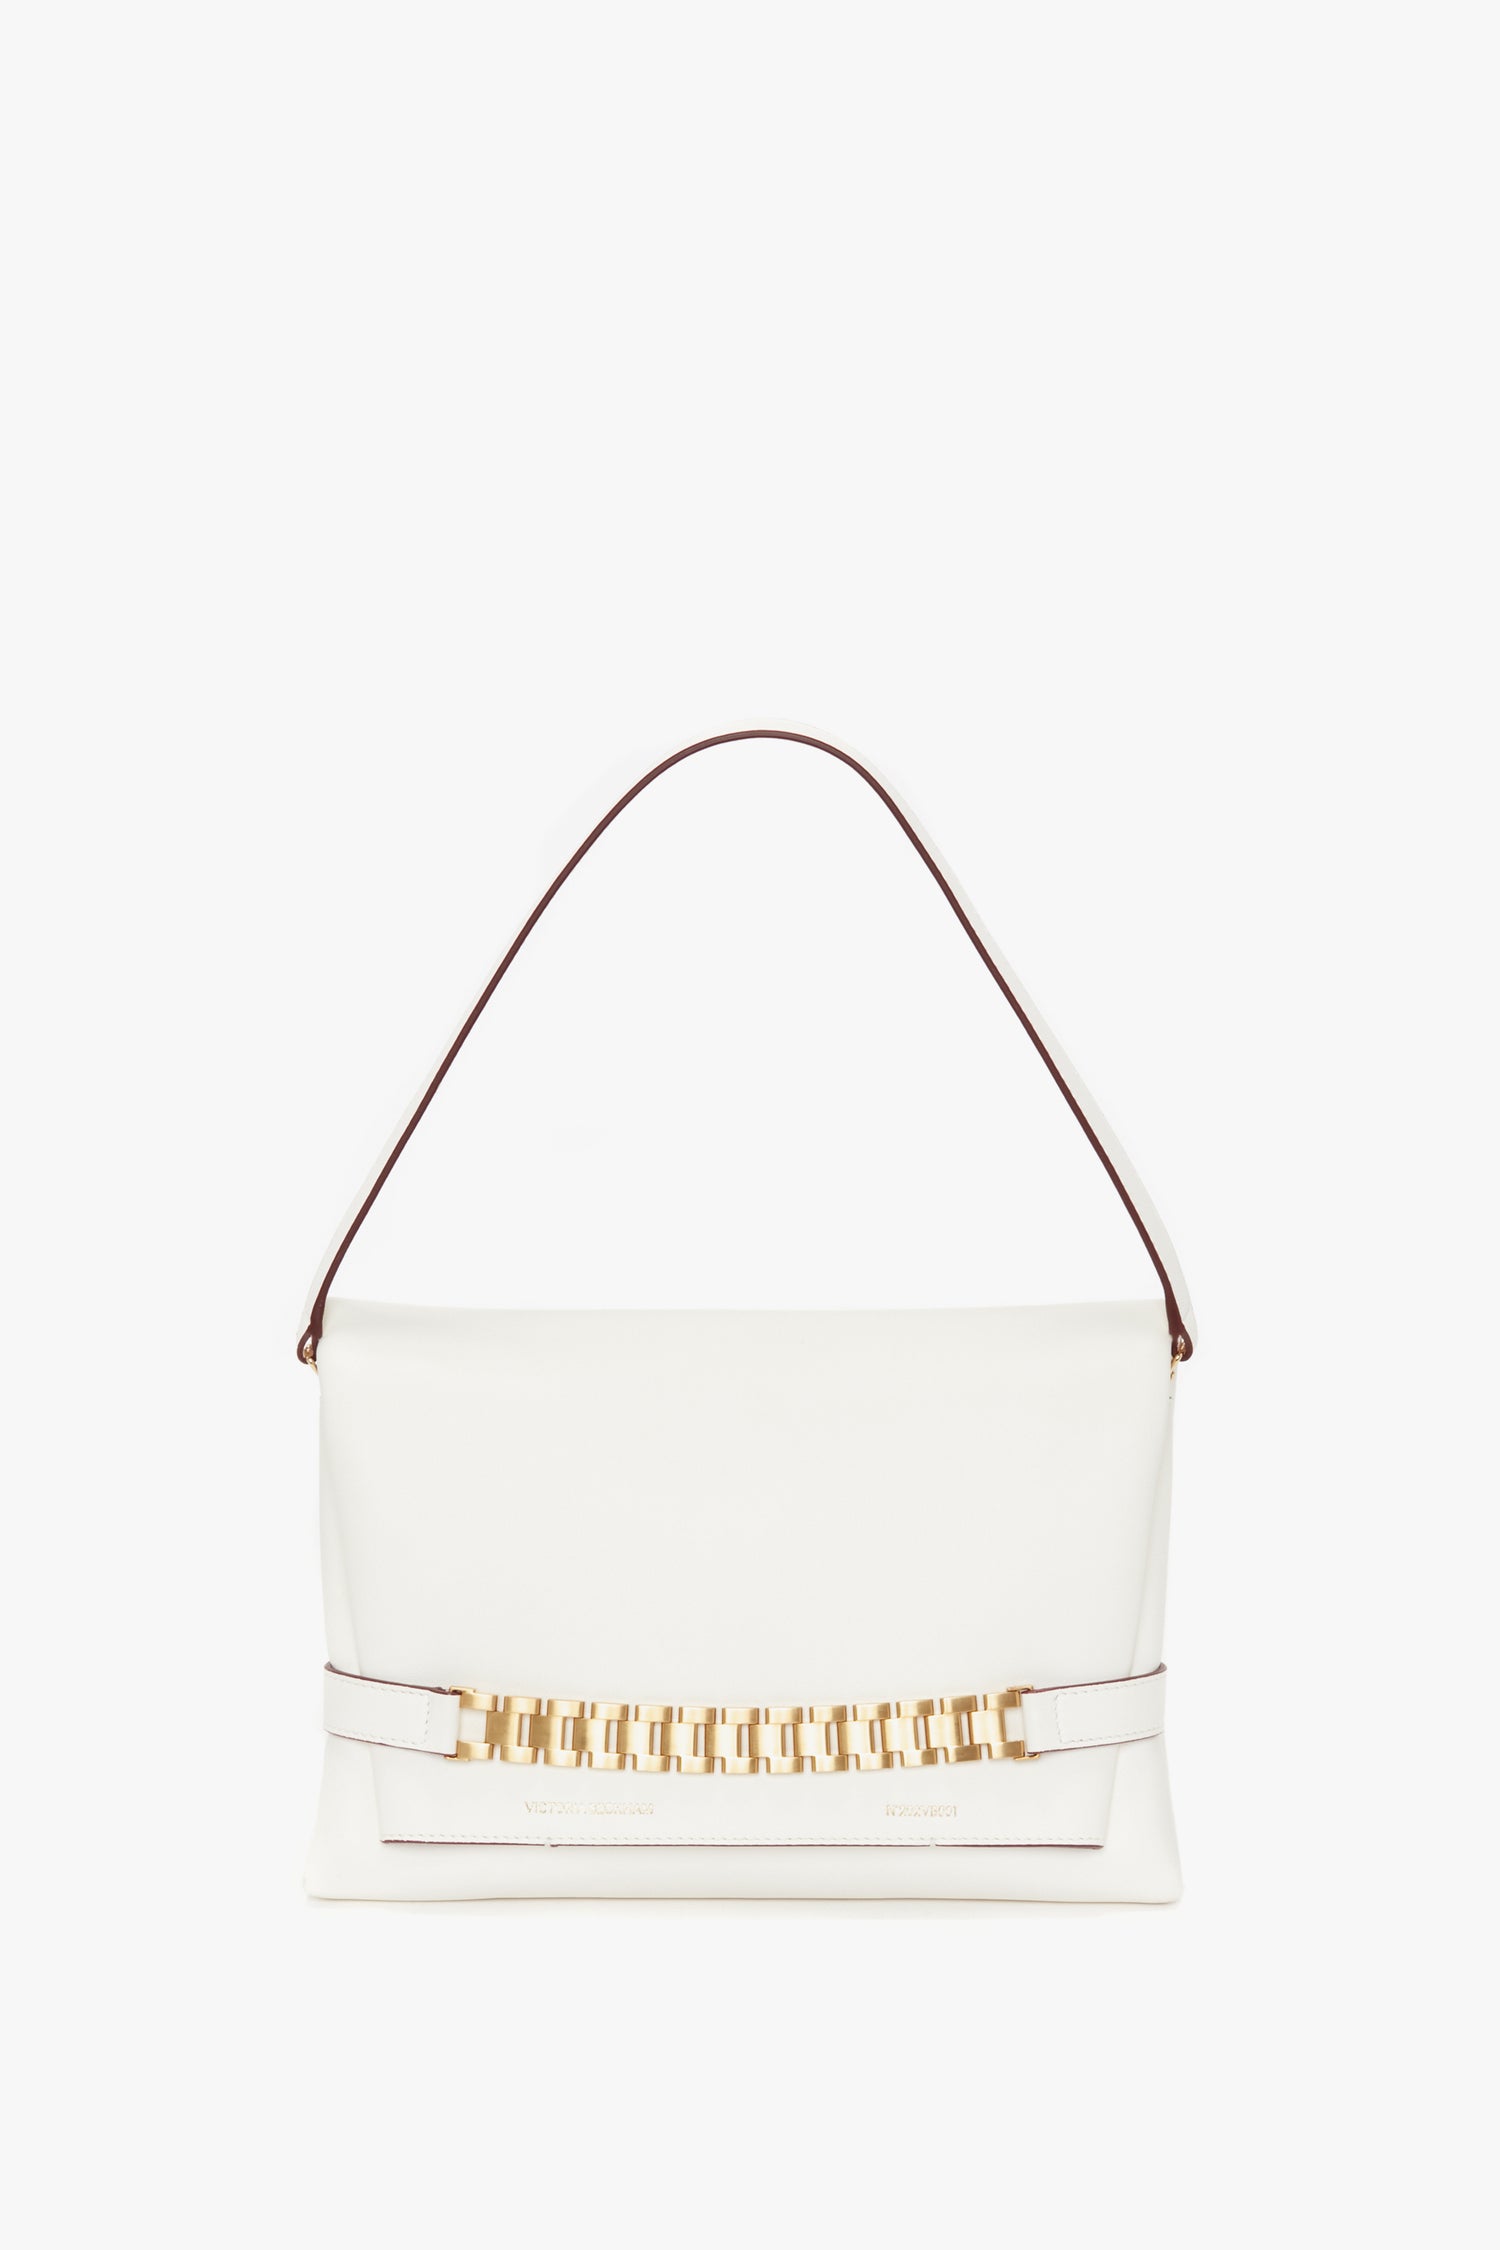 A white Nappa leather Chain Pouch with Strap In White Leather handbag by Victoria Beckham, displayed against a plain white background.